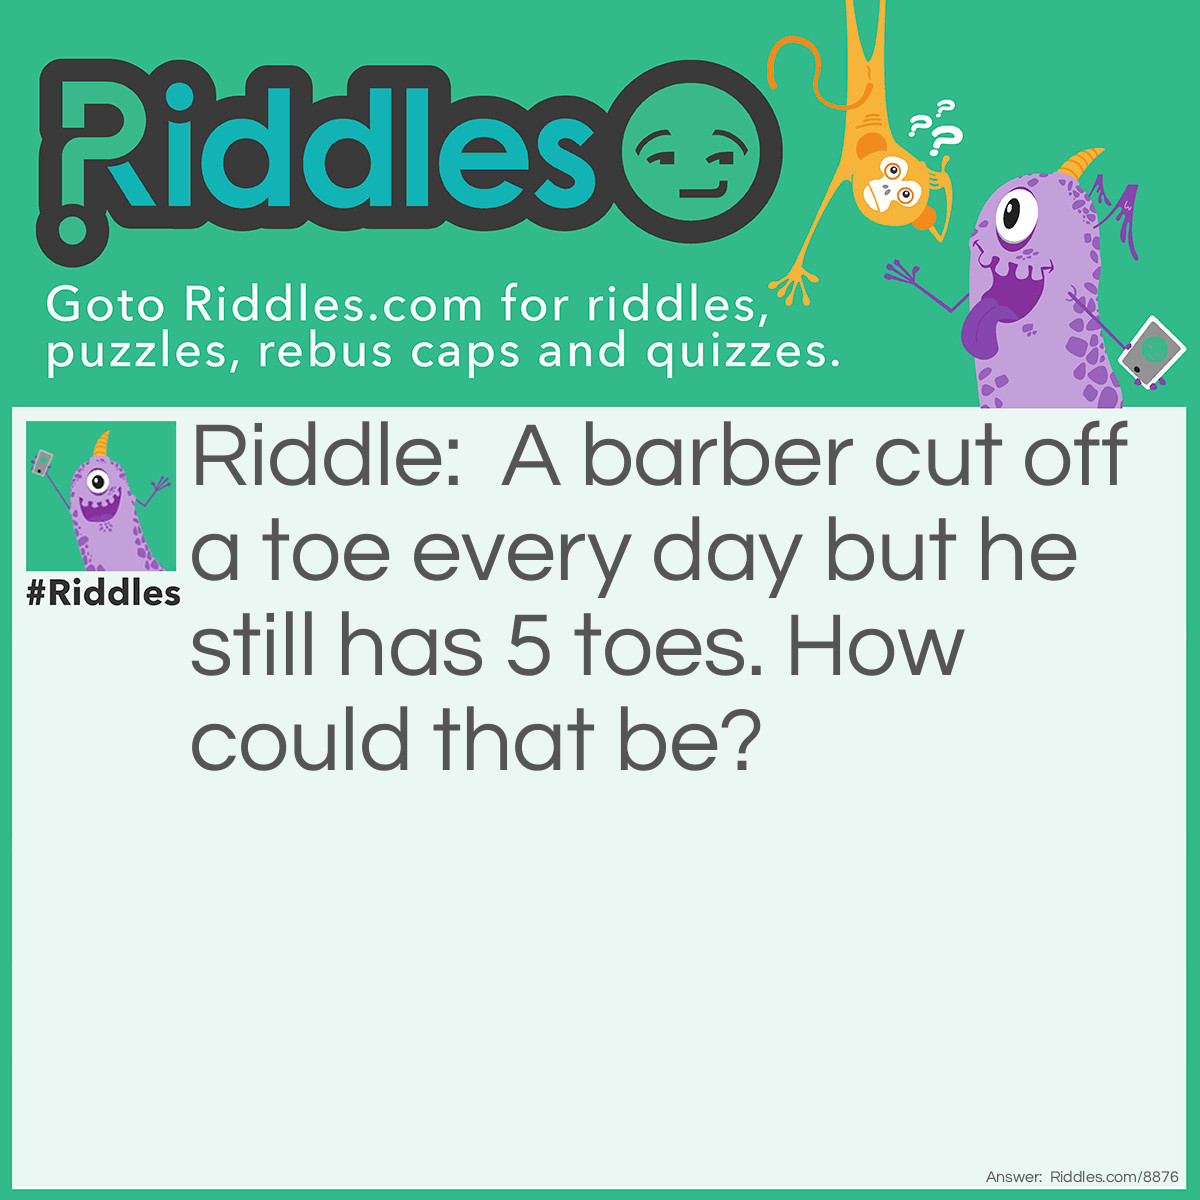 Riddle: A barber cut off a toe every day but he still has 5 toes. How could that be? Answer: He cut of somebody eles toe.